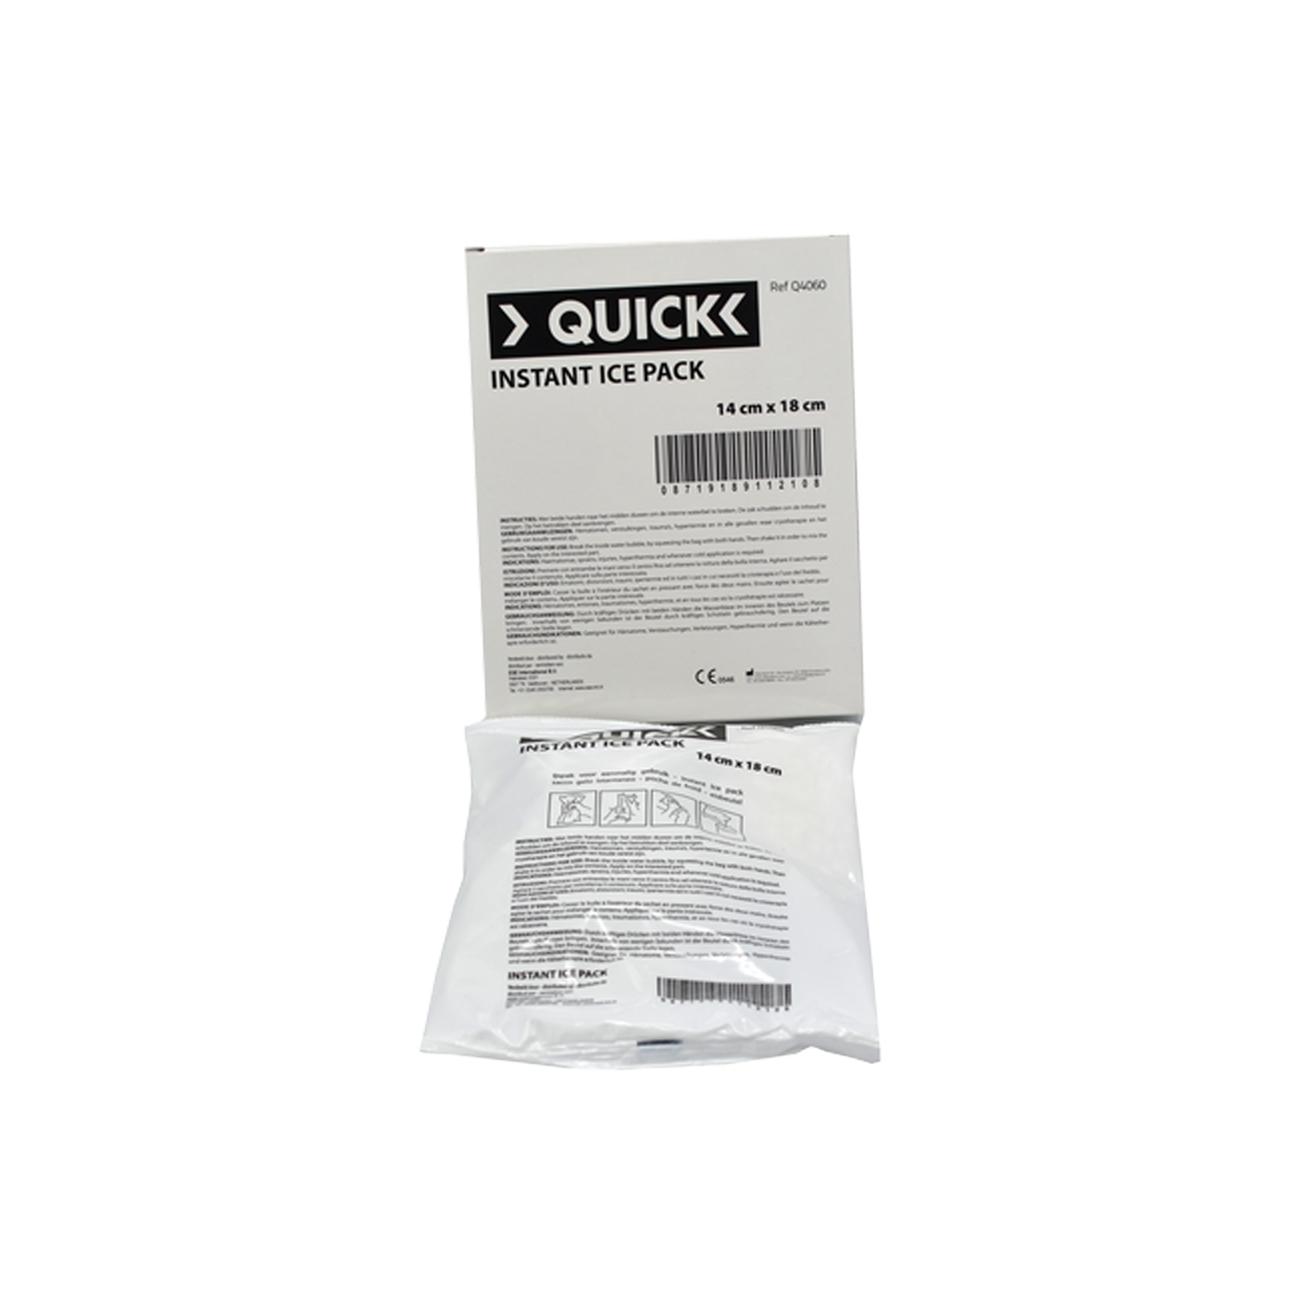 Vuil pin regeling Quick instant coldpack 14 x 18 cm - ESE International